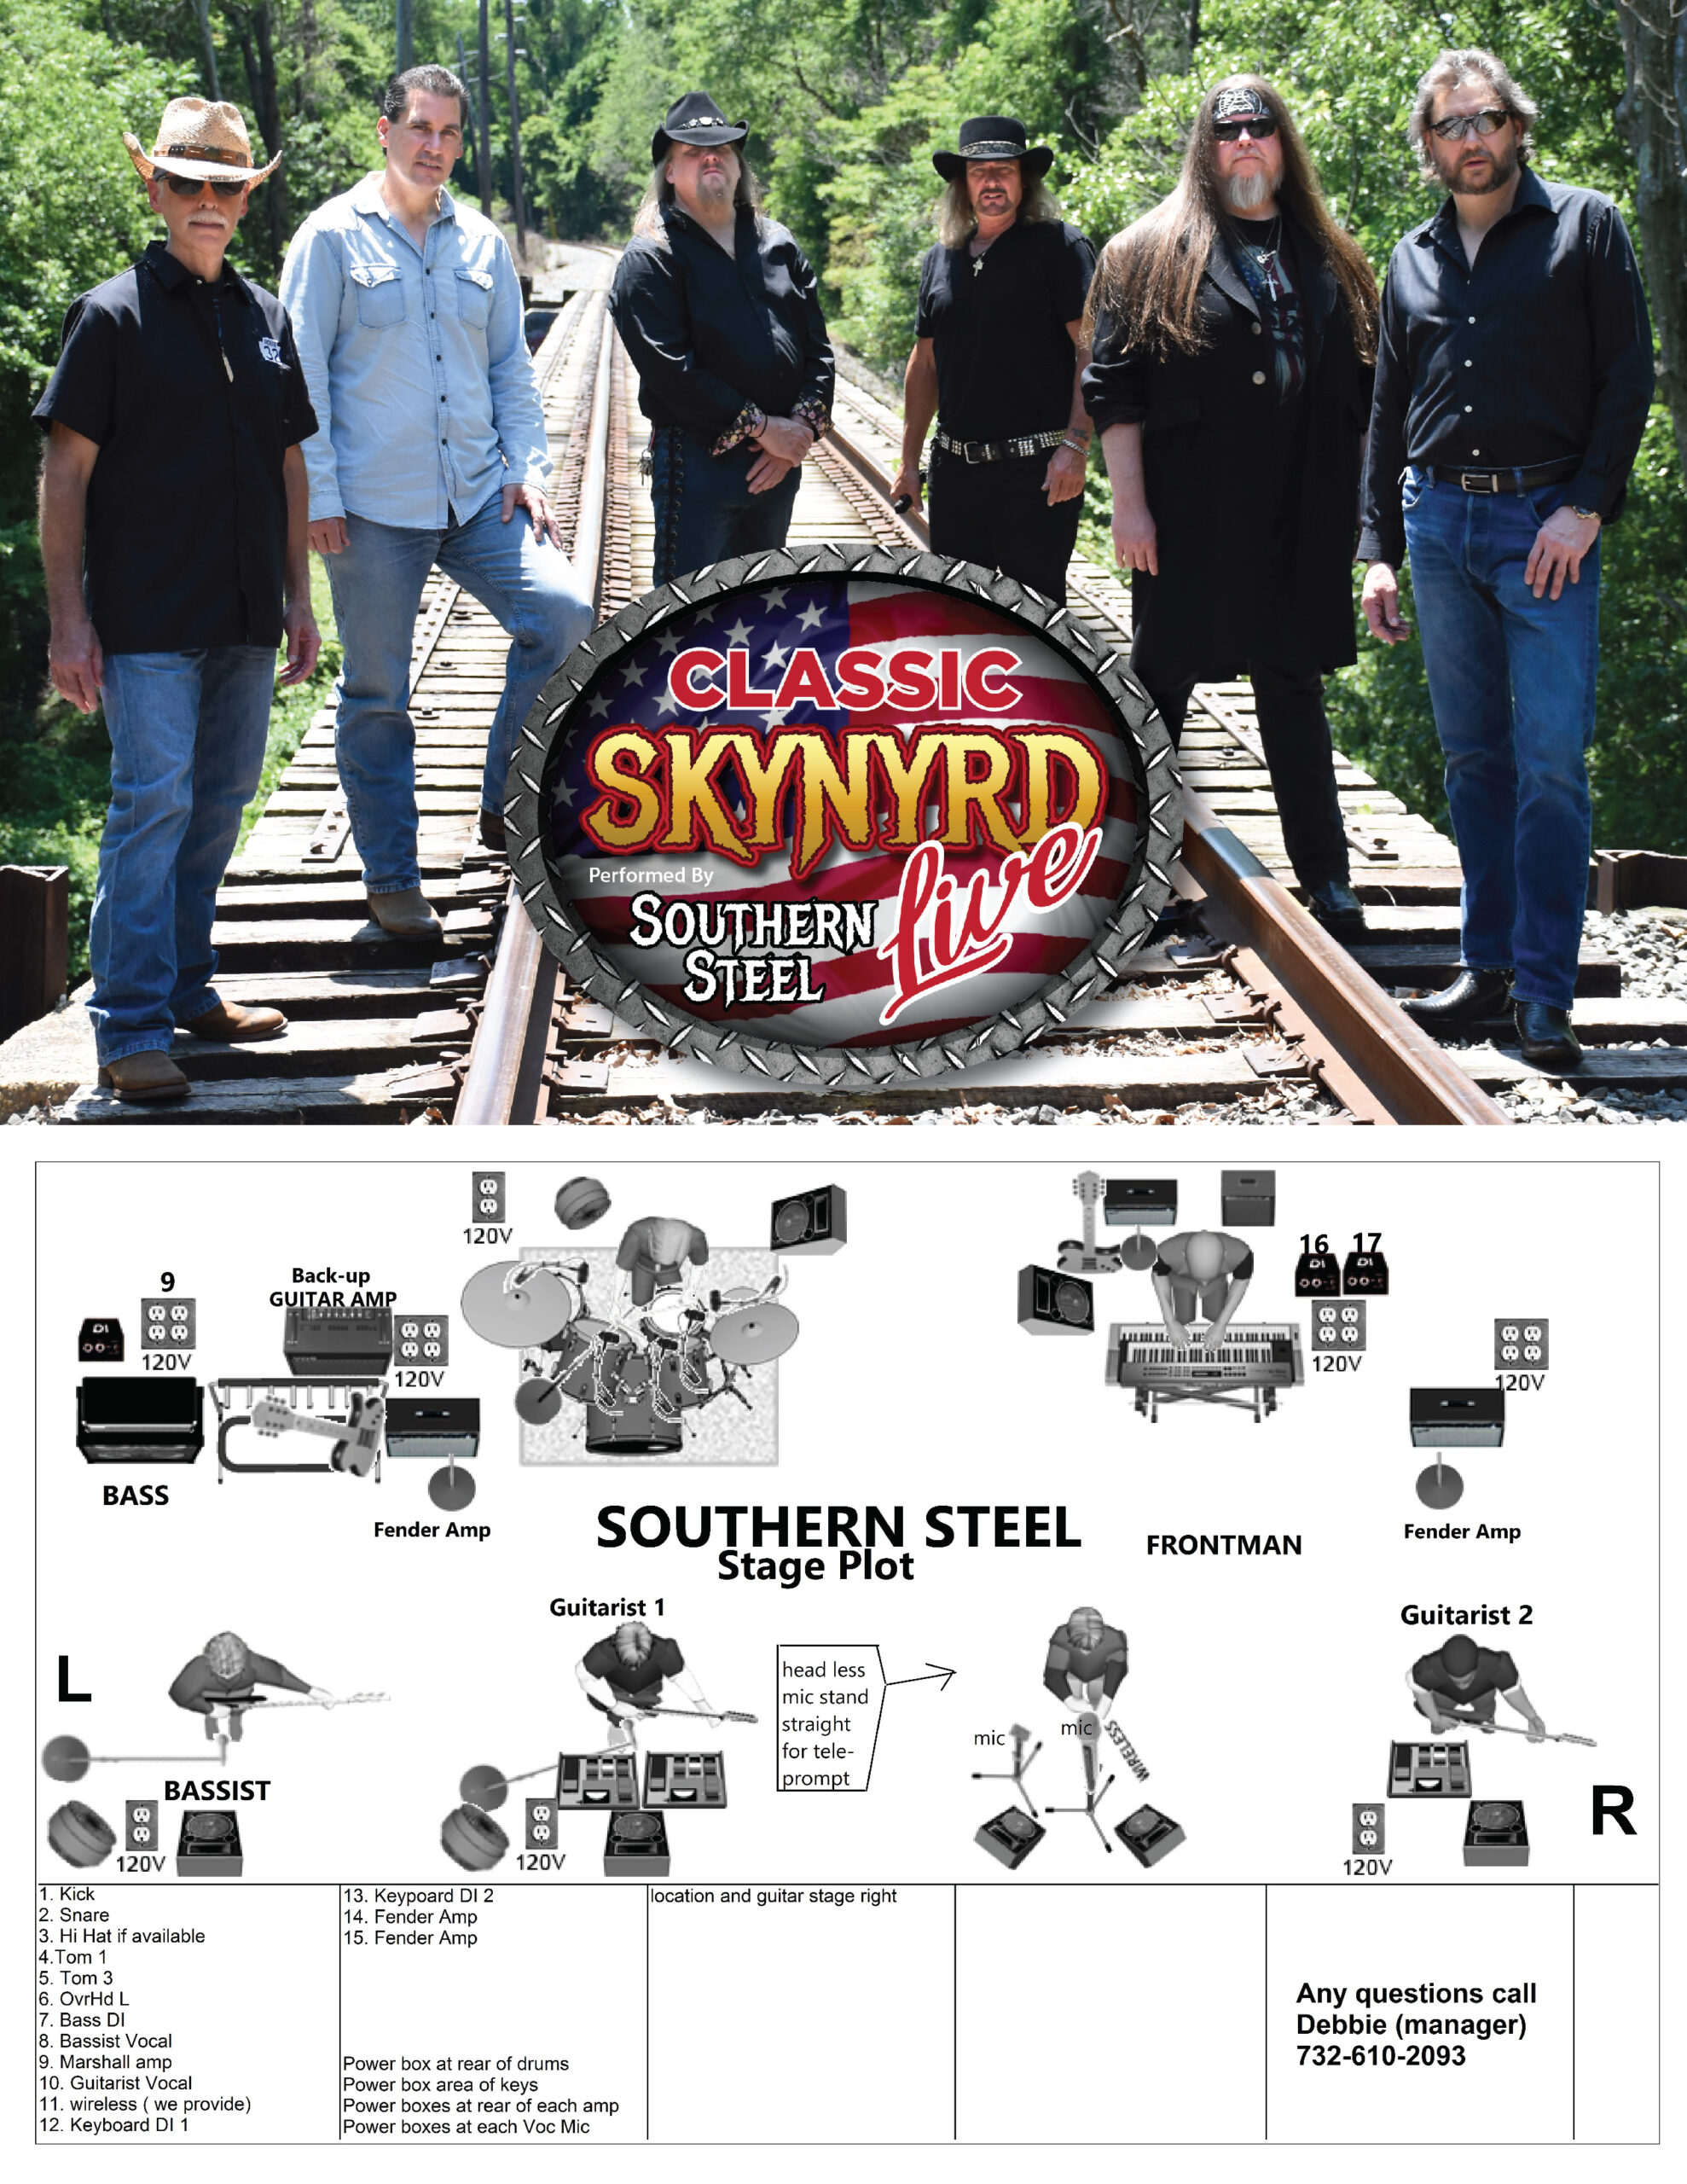 Southern Steel Stage Plot